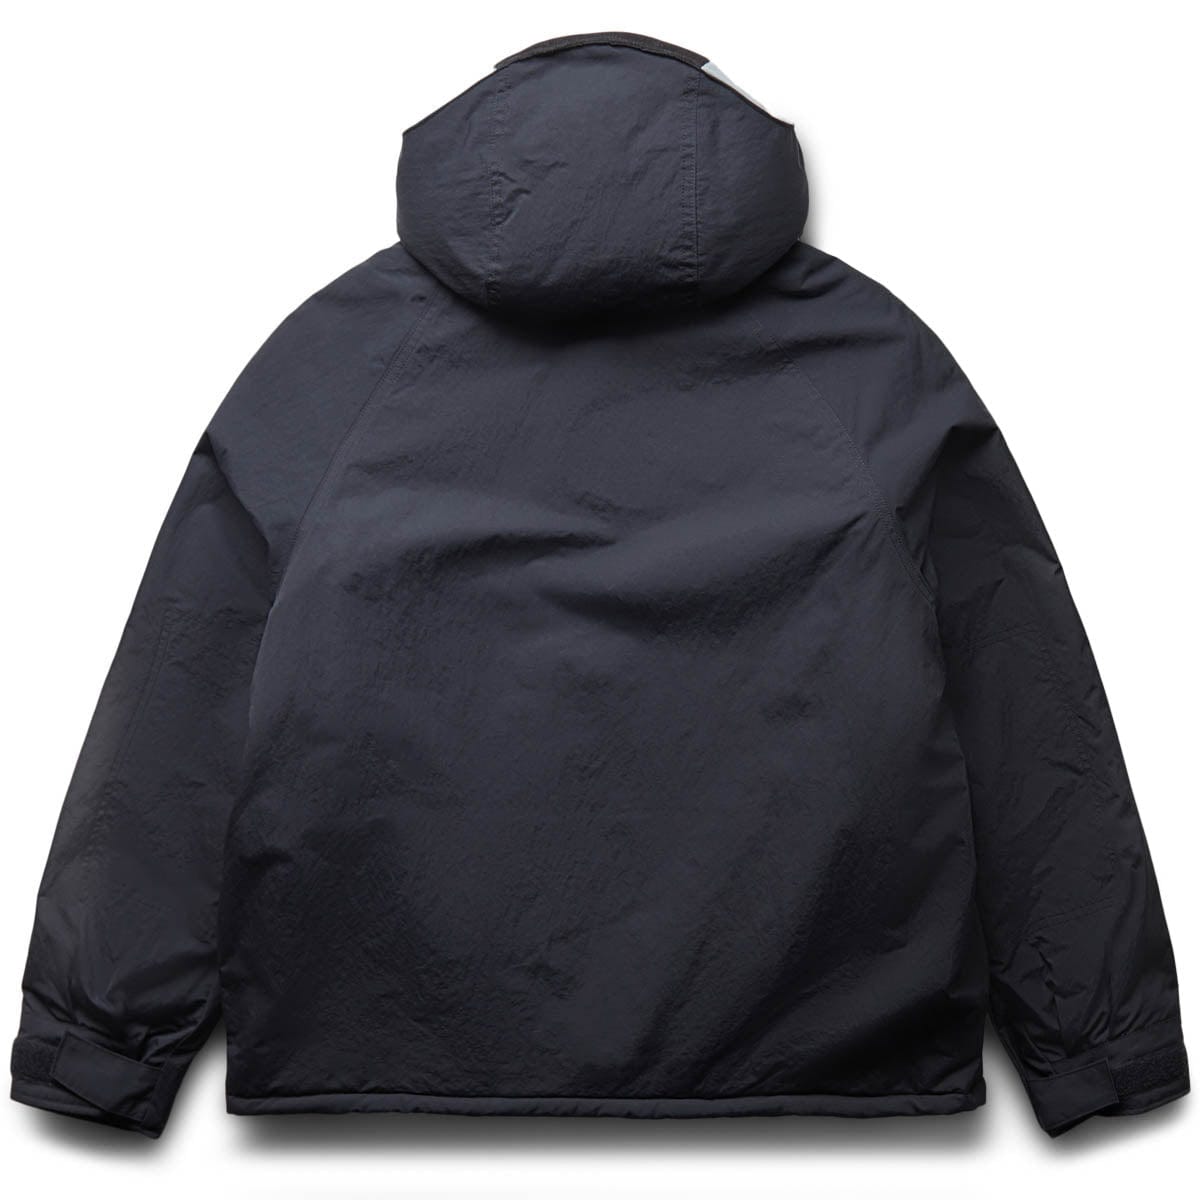 Mountain Research Outerwear MT PARKA